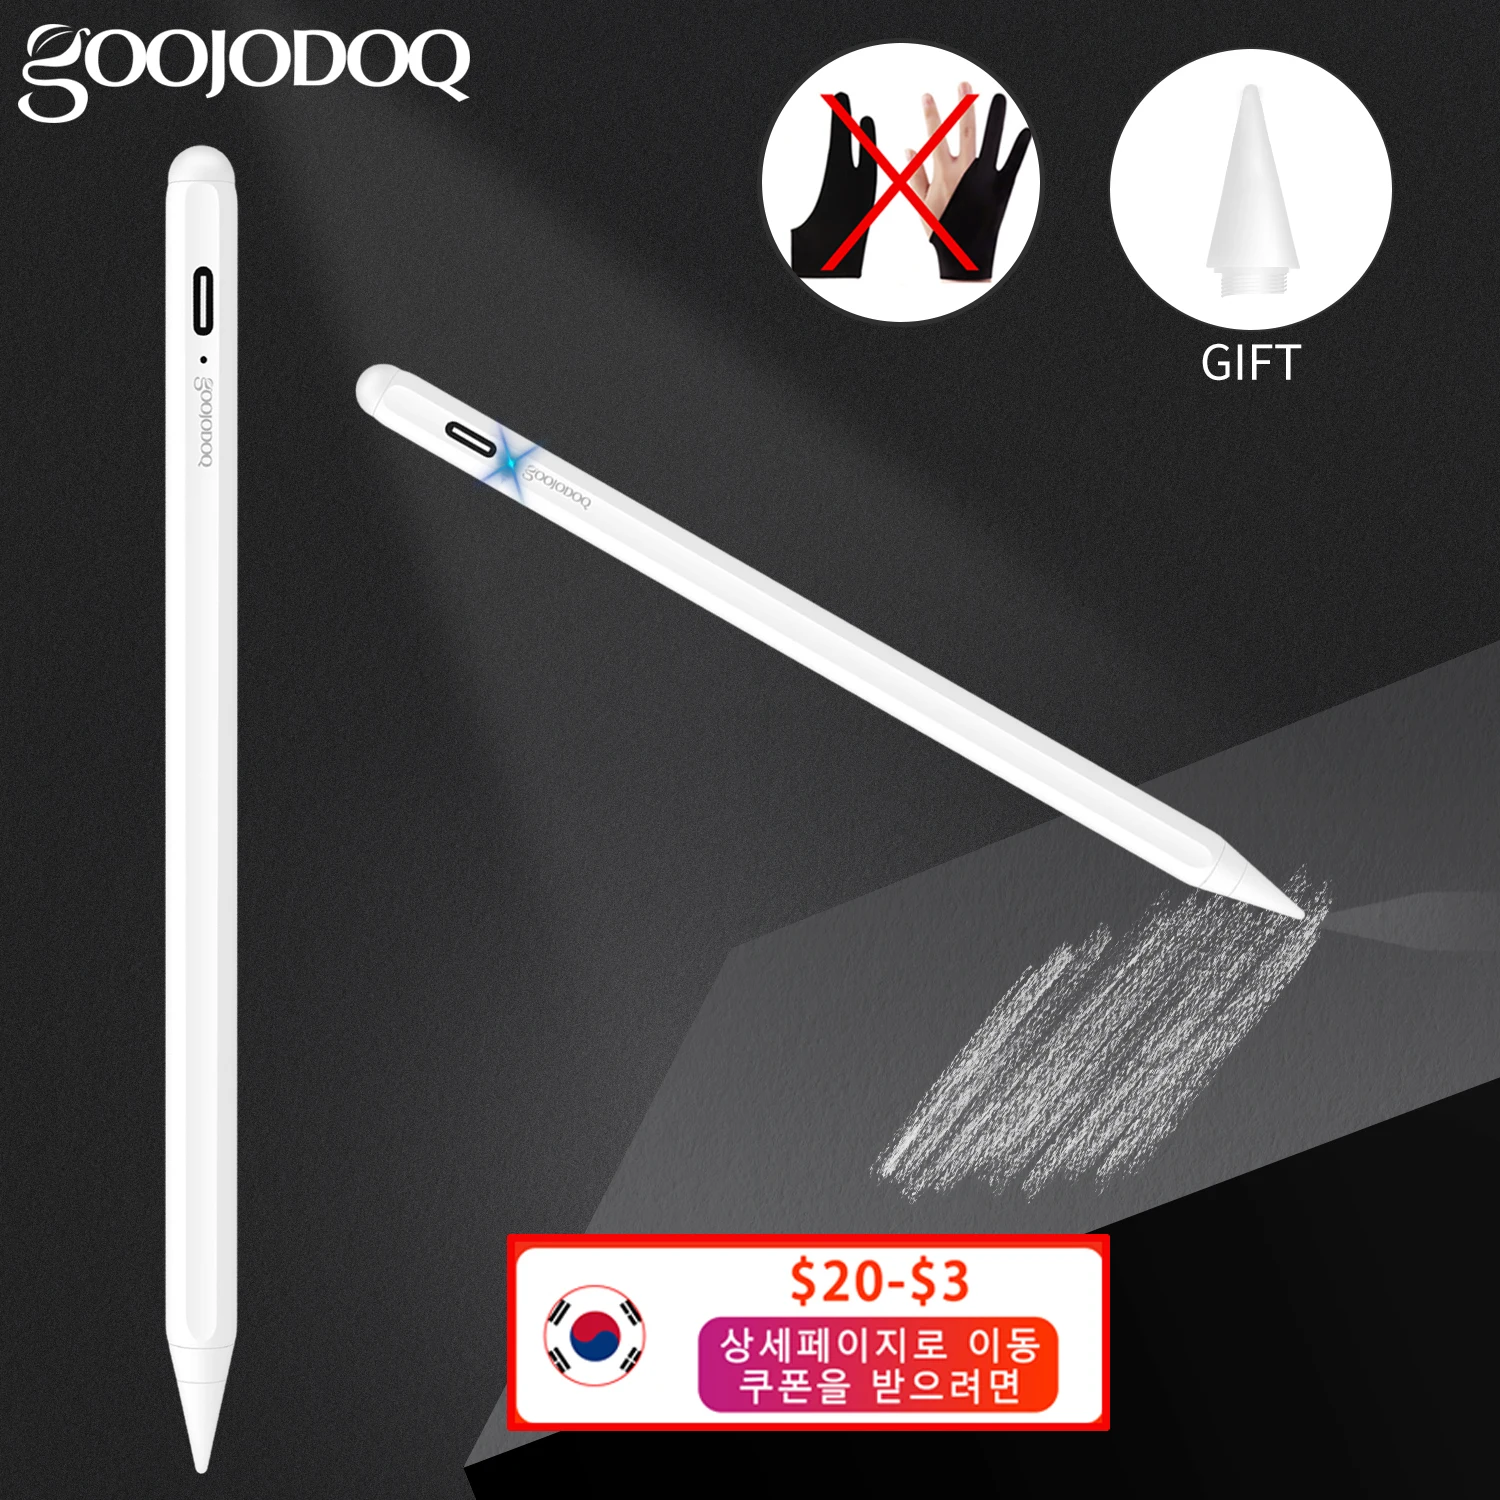 for Ipad Pencil Pen Stylus for Ipad 9.7 Pro 11 12.9 Air 3 10.5 10.2 Mini 5 Touch Pen for Pencil 2 1,White